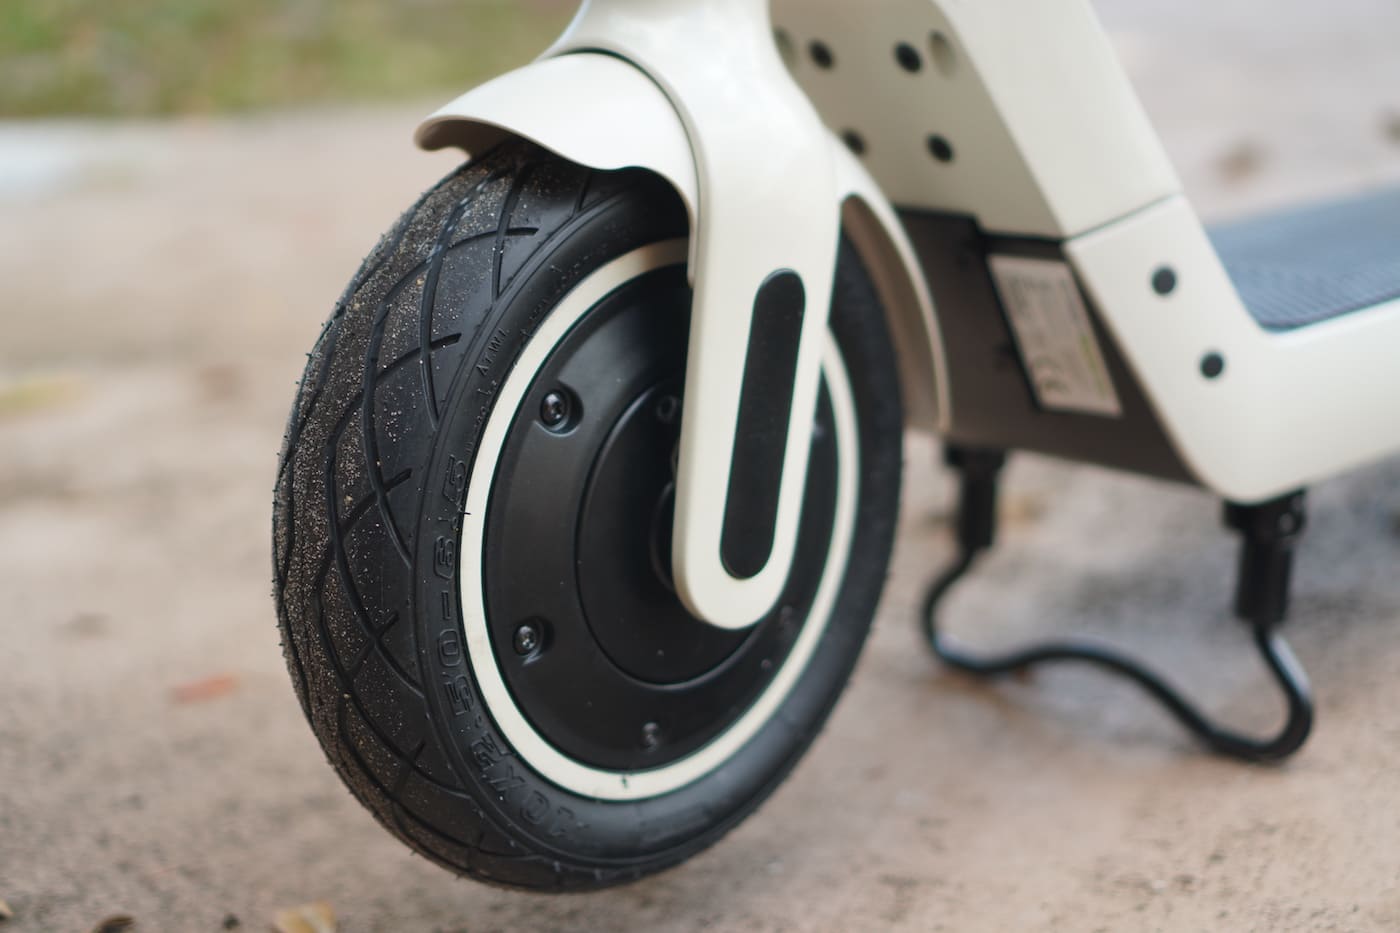 anyhill um-2 electric scooter